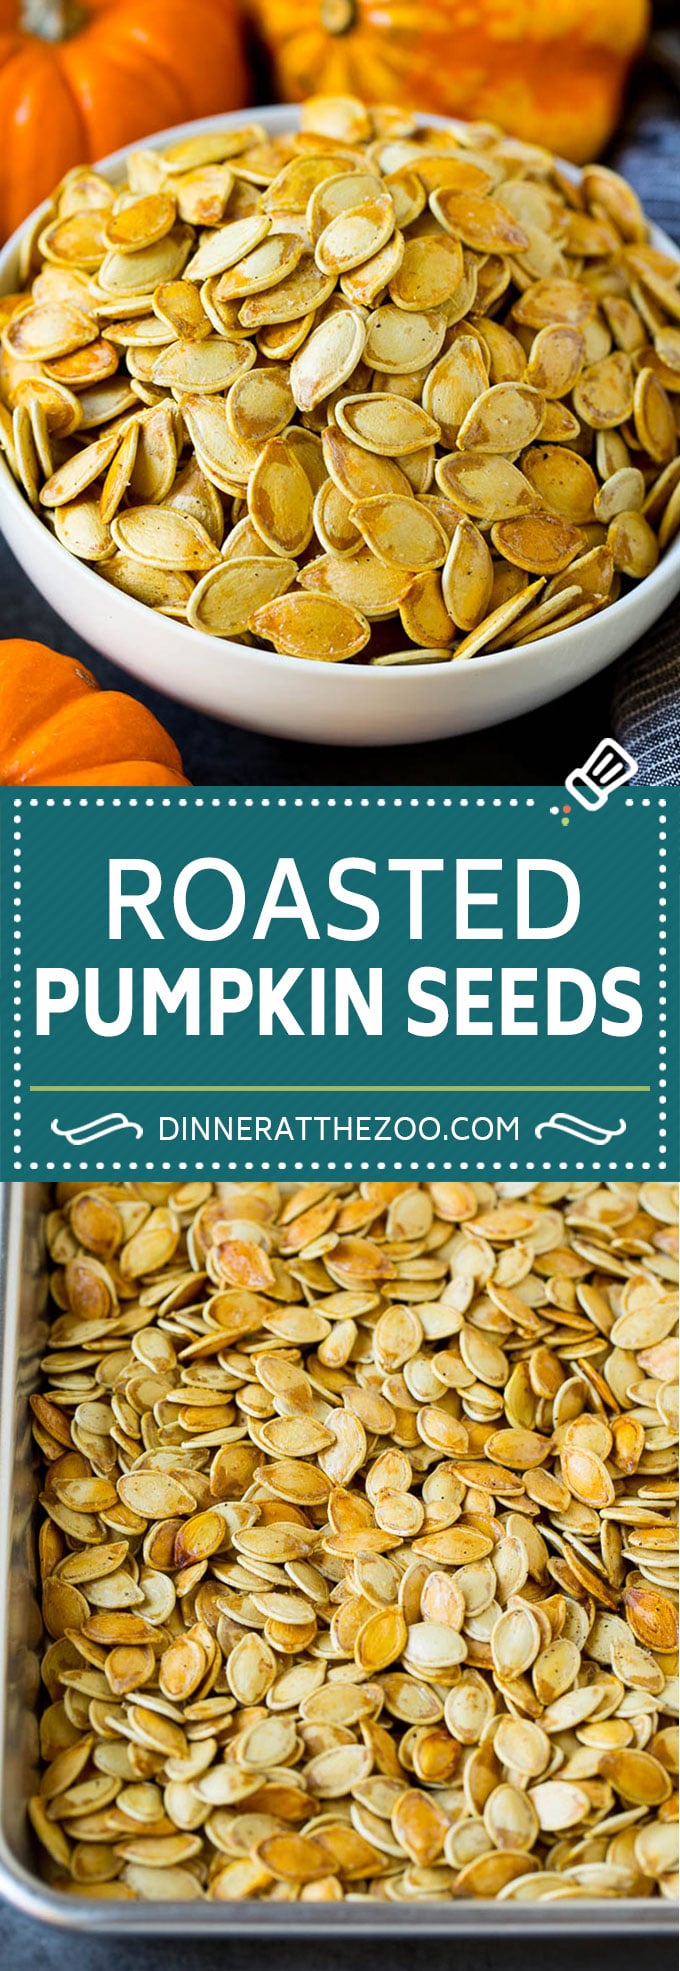 These roasted pumpkin seeds are coated in butter and seasonings, then baked until golden brown.